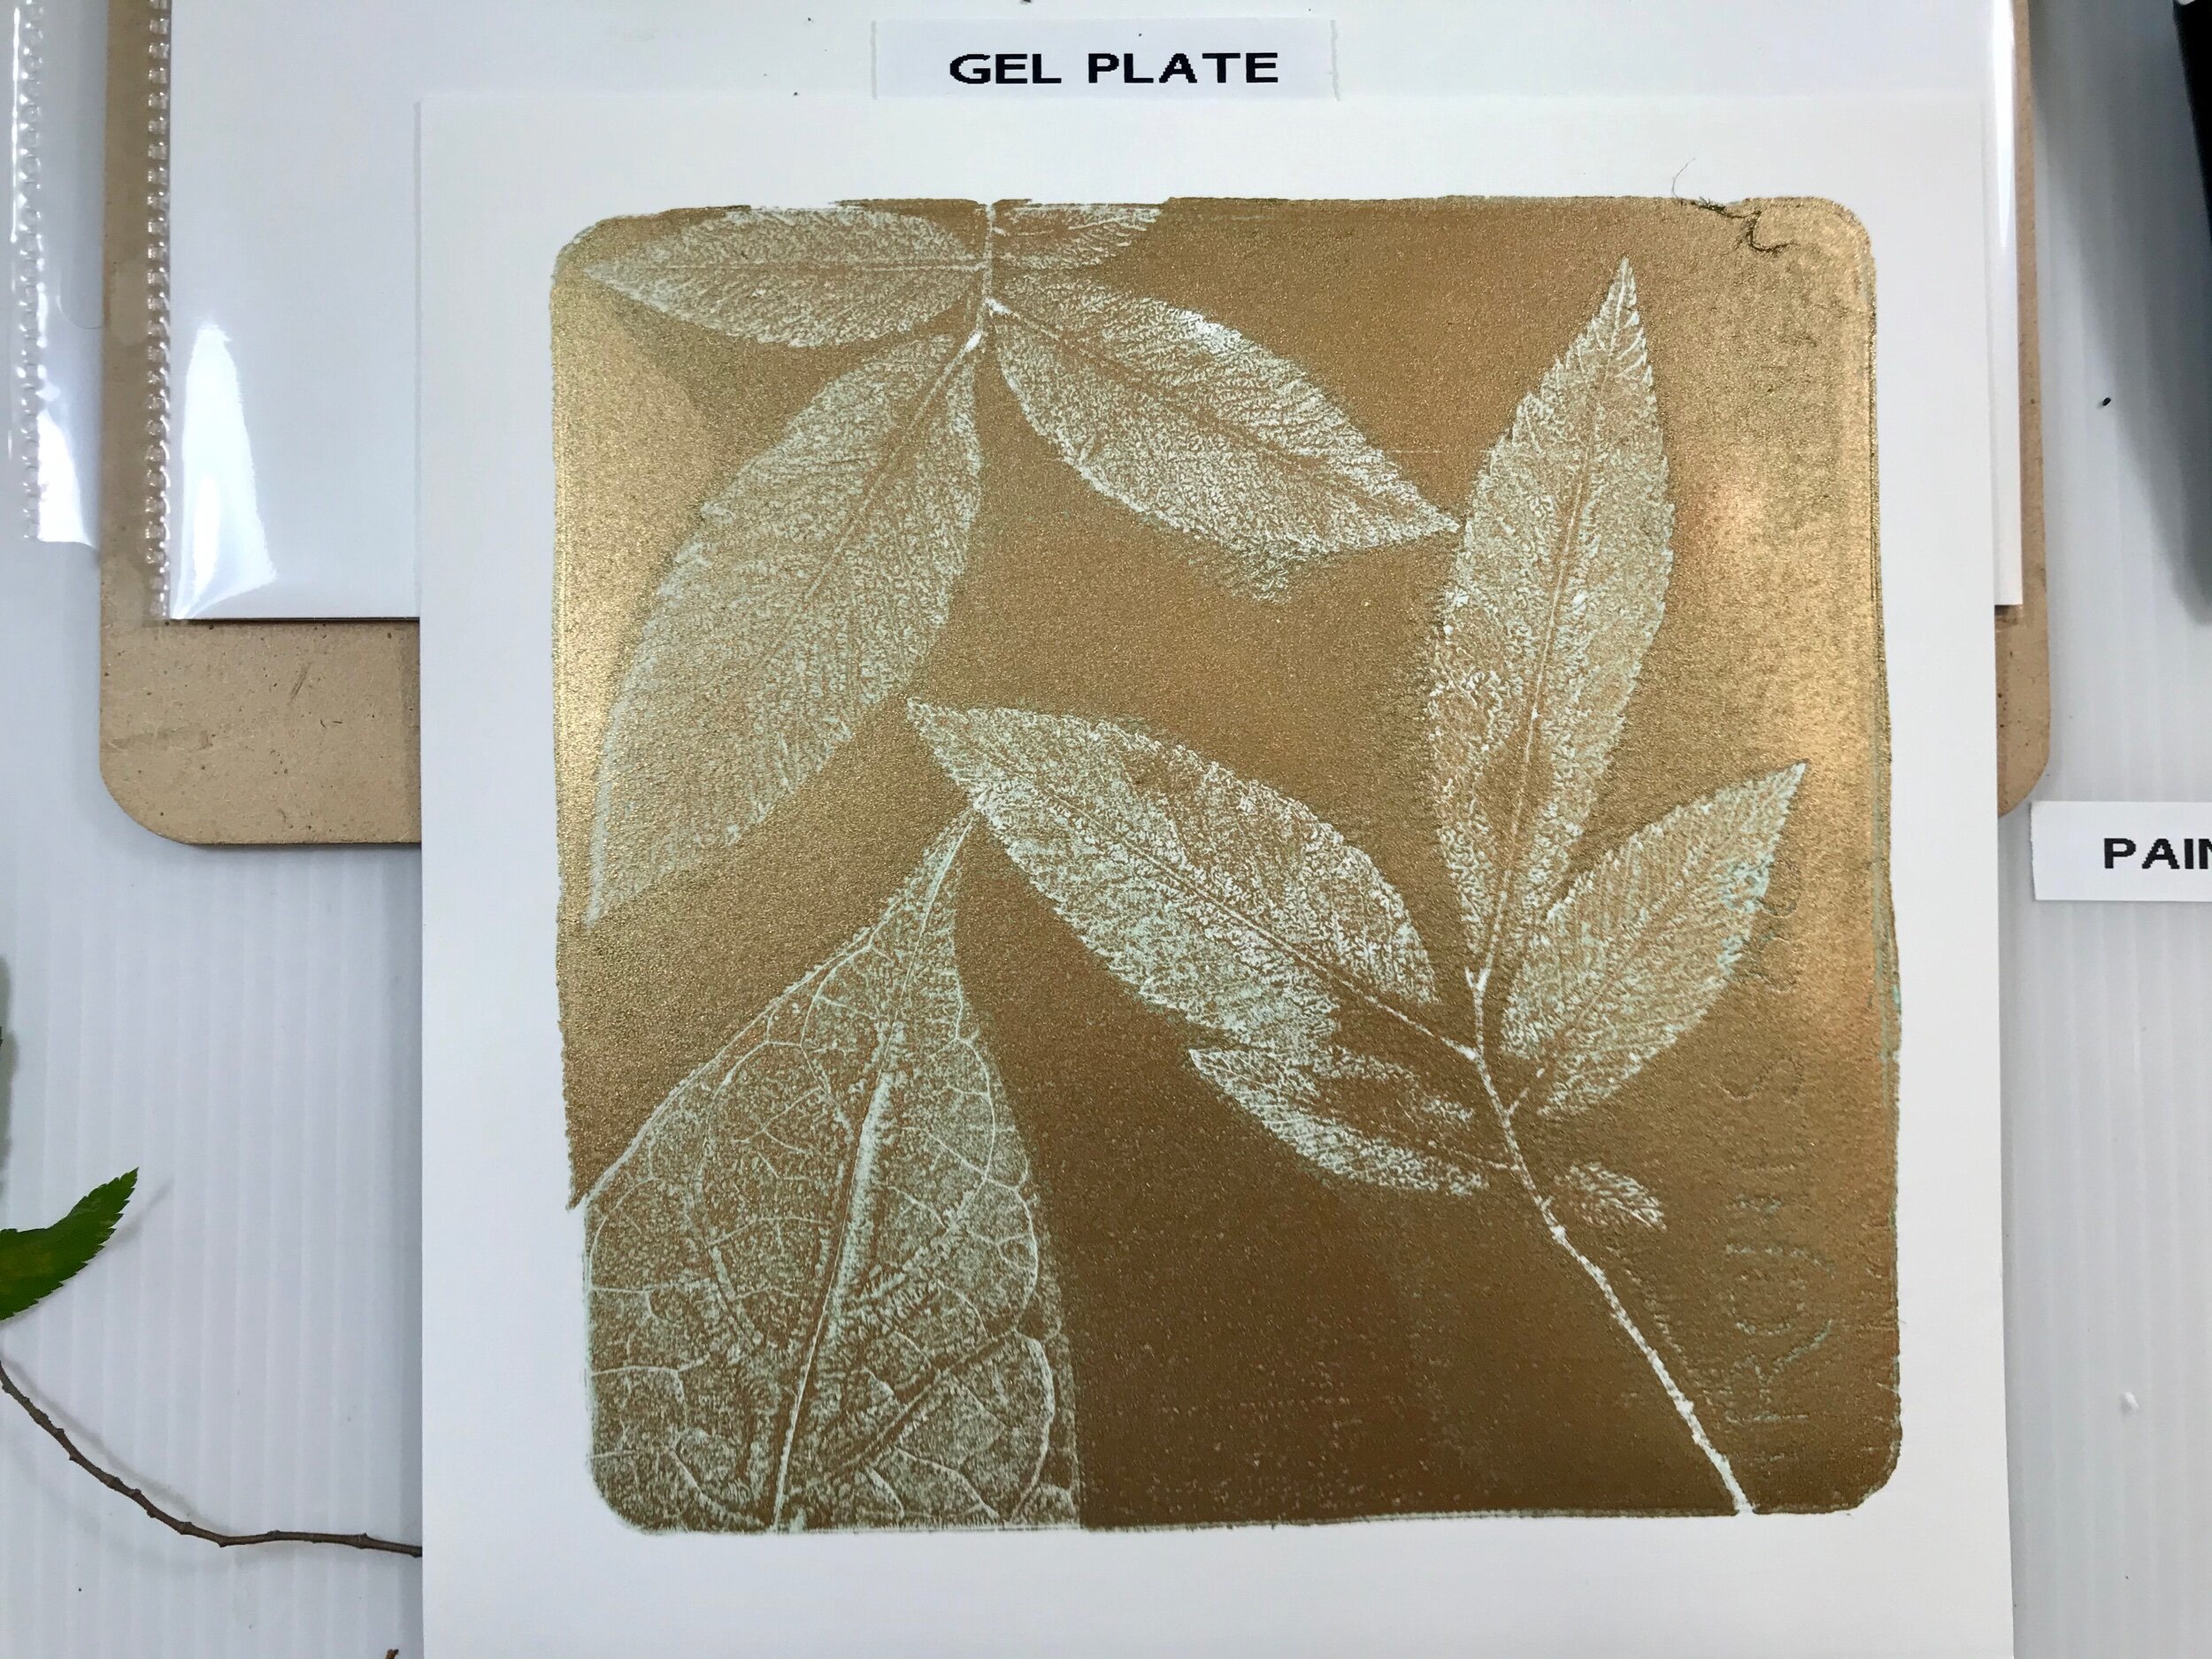 Gelatin plate printing with GOLDEN OPEN acrylics